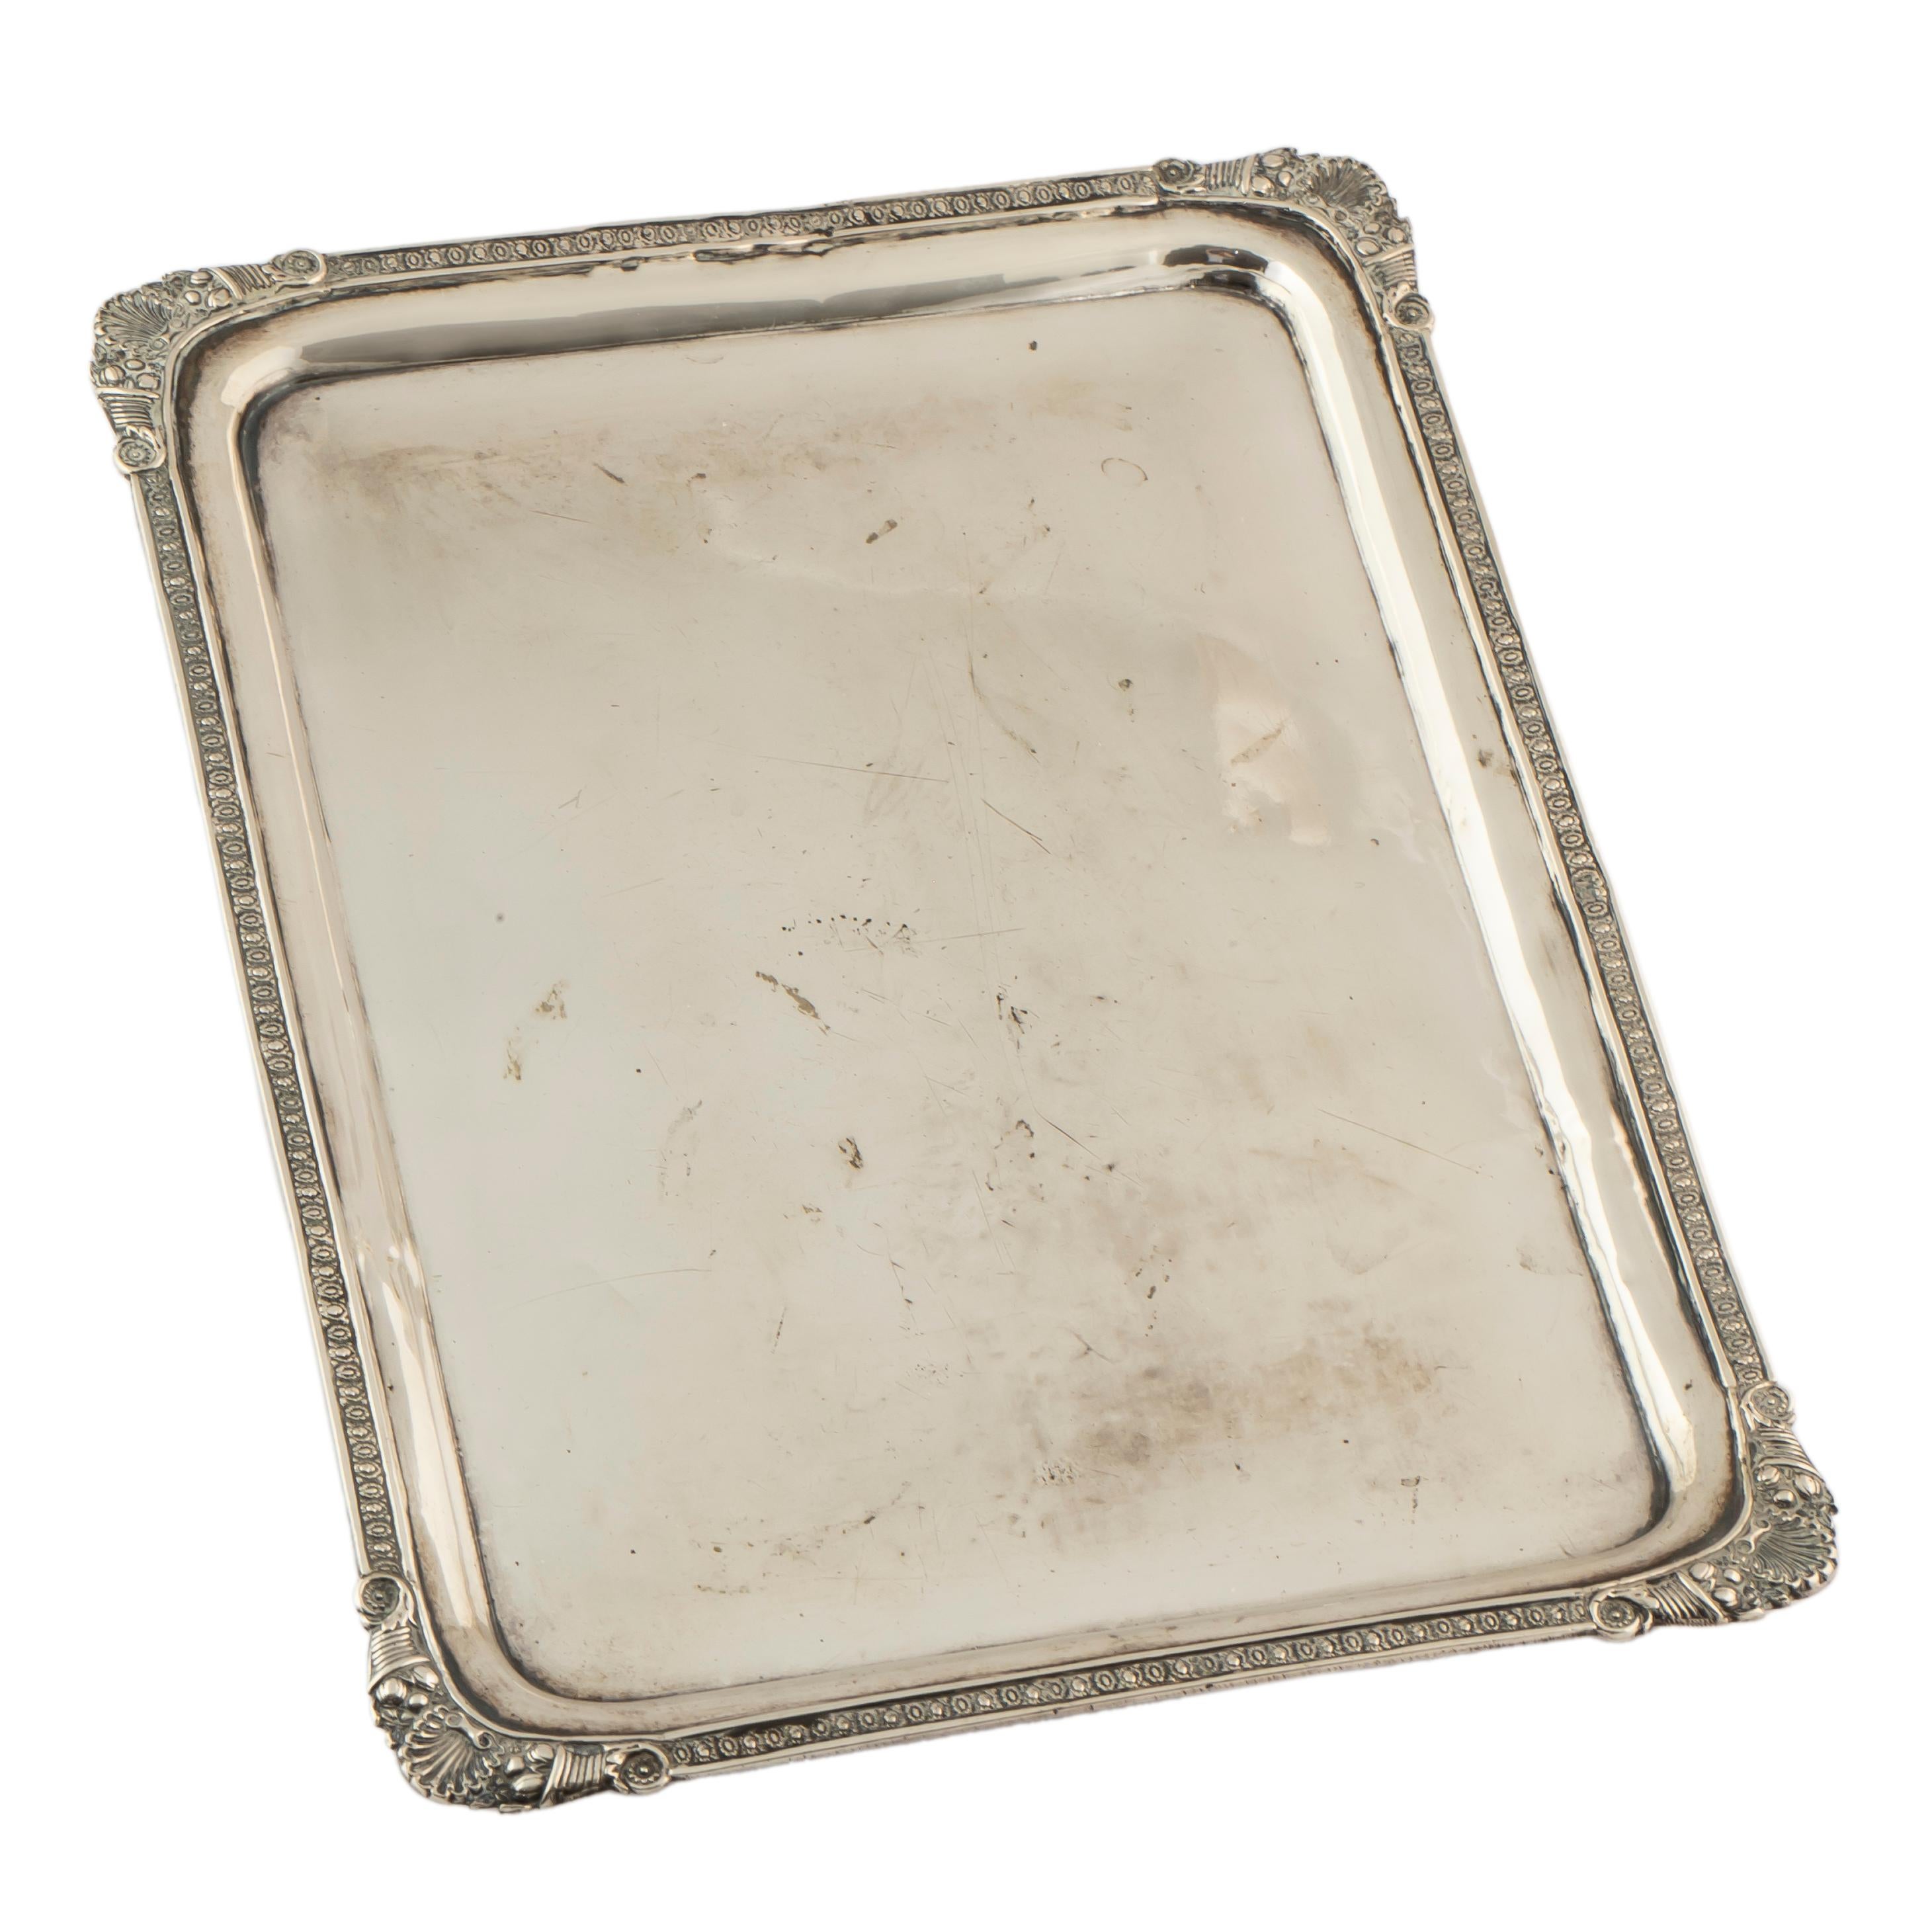 This charming Russian rectangular silver tray from the Pushkin era was crafted by the renowned silver master Fedor Timofeev of Moscow during the reign of Tsar Nicholas I in 1835.  Of polished silver with everted border, the rim is decorated with a